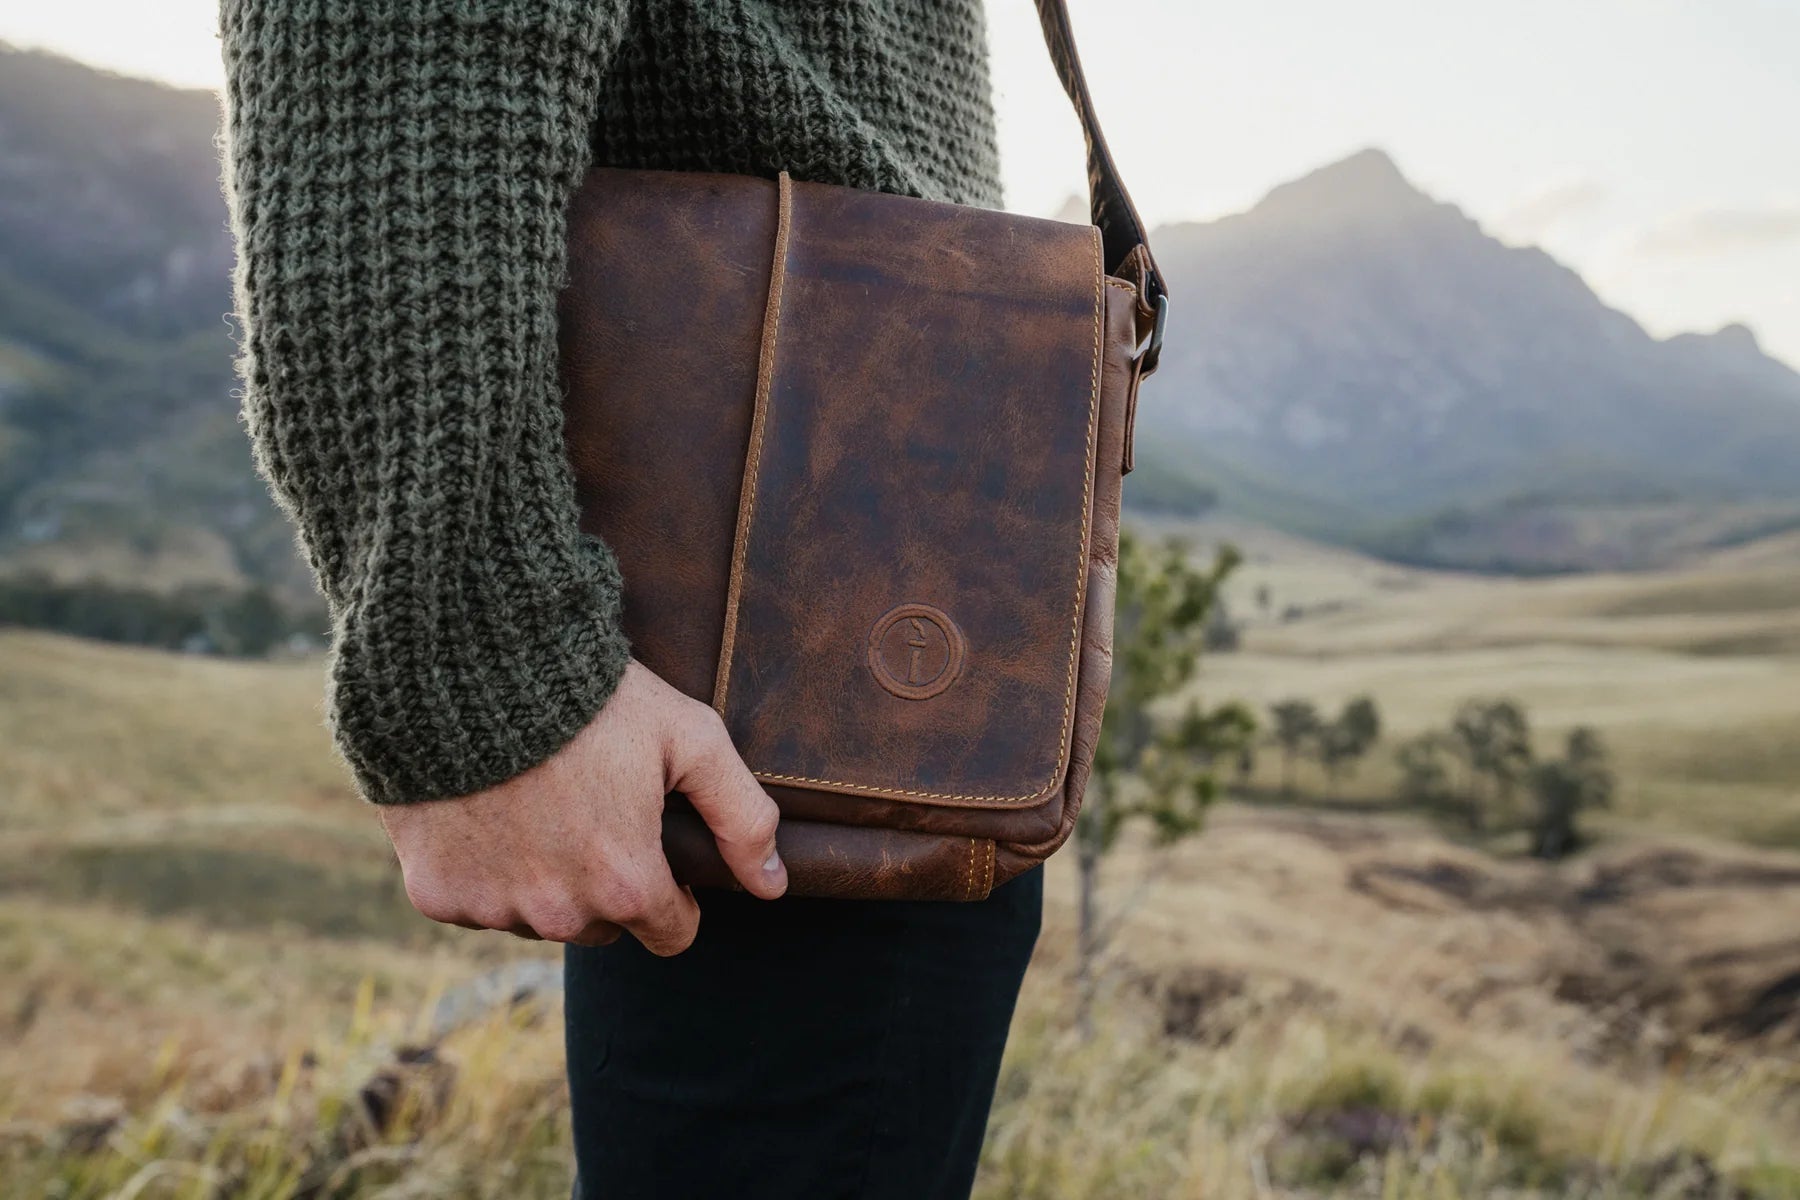 Wanderer Leather Man Bag OS Dusty Antique Accessories by Indepal | The Bloke Shop